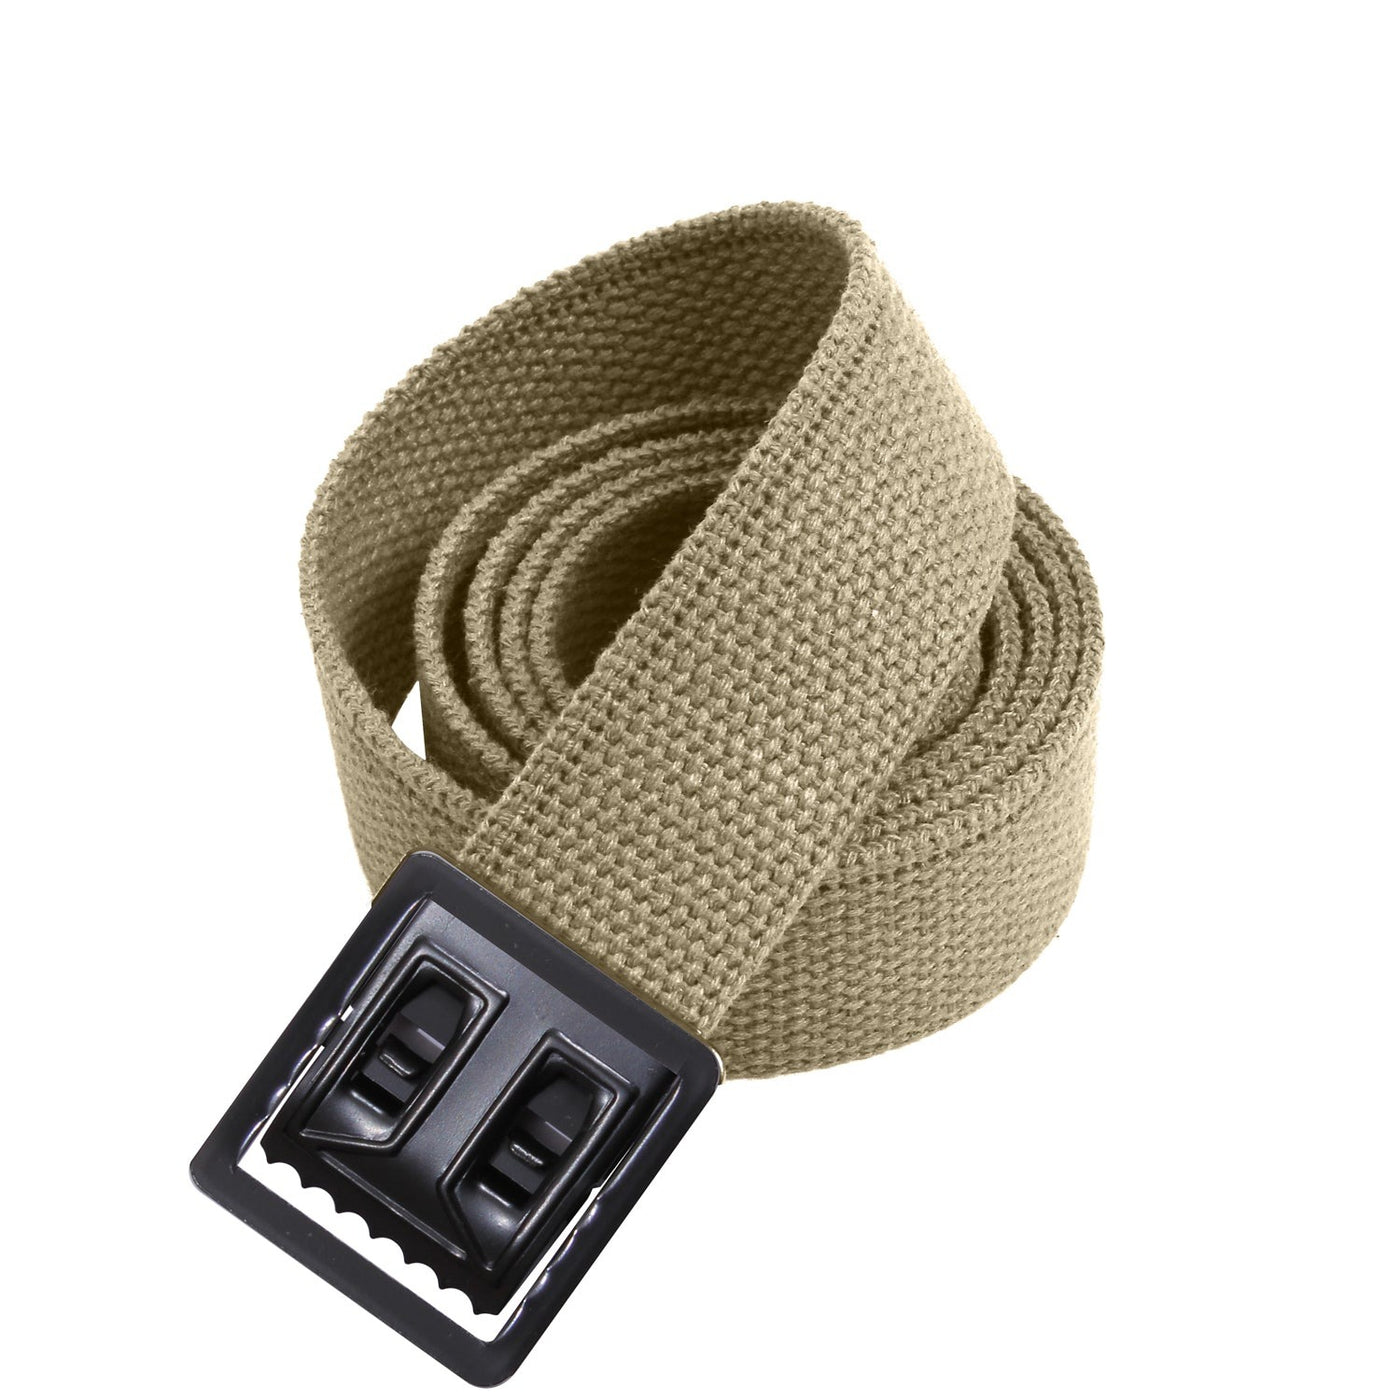 Canvas Web Belt Military Style with Black Buckle and Tip 56 Long Many  Colors (Black) at  Men's Clothing store: Apparel Belts